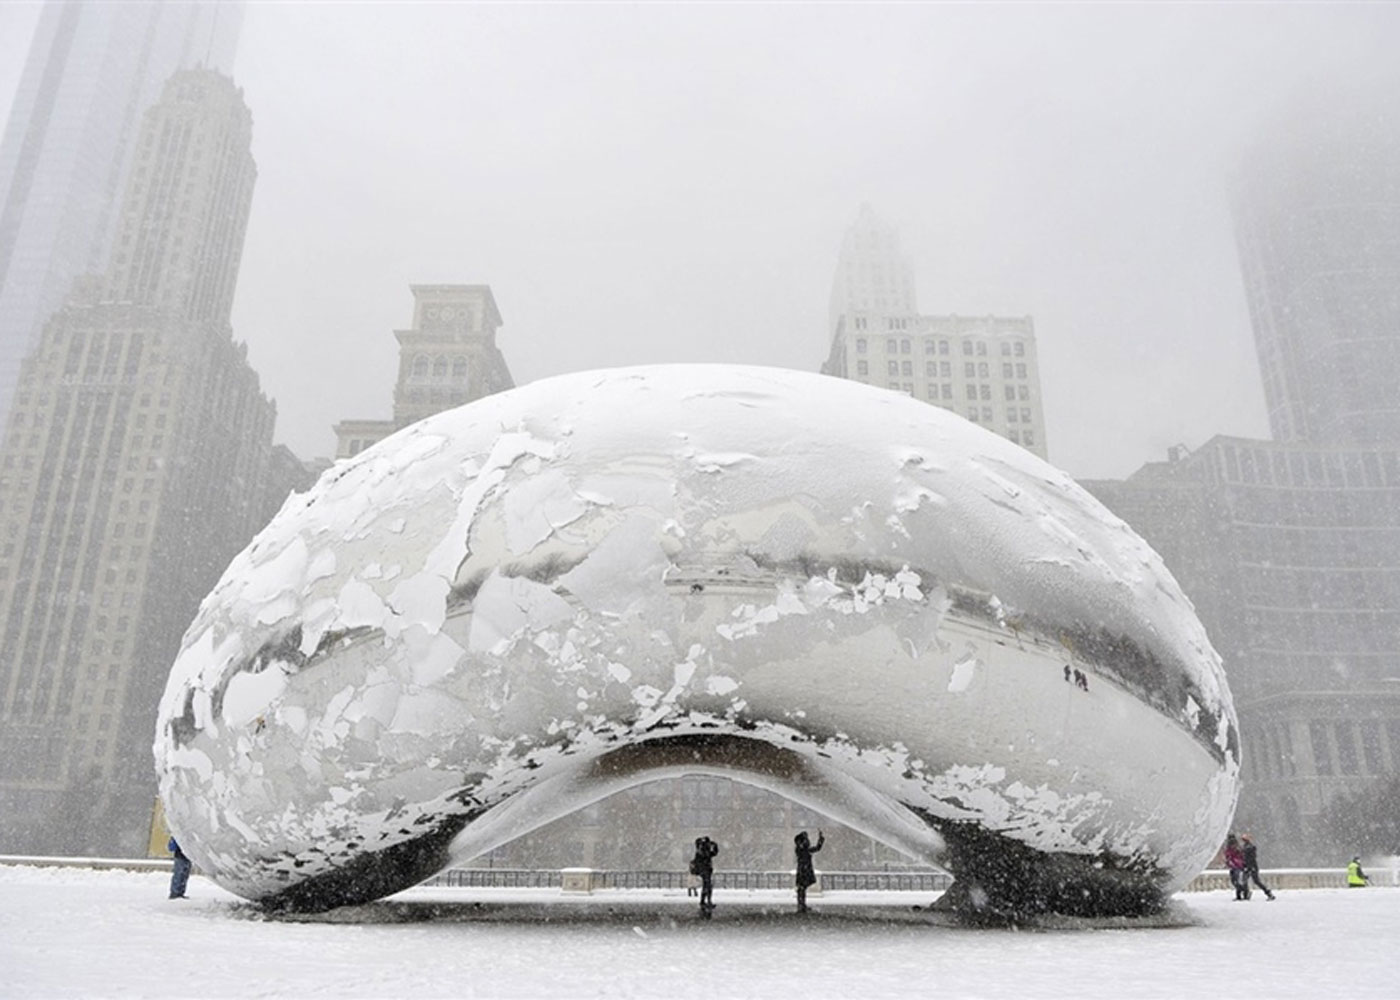 The Bean covered in snow